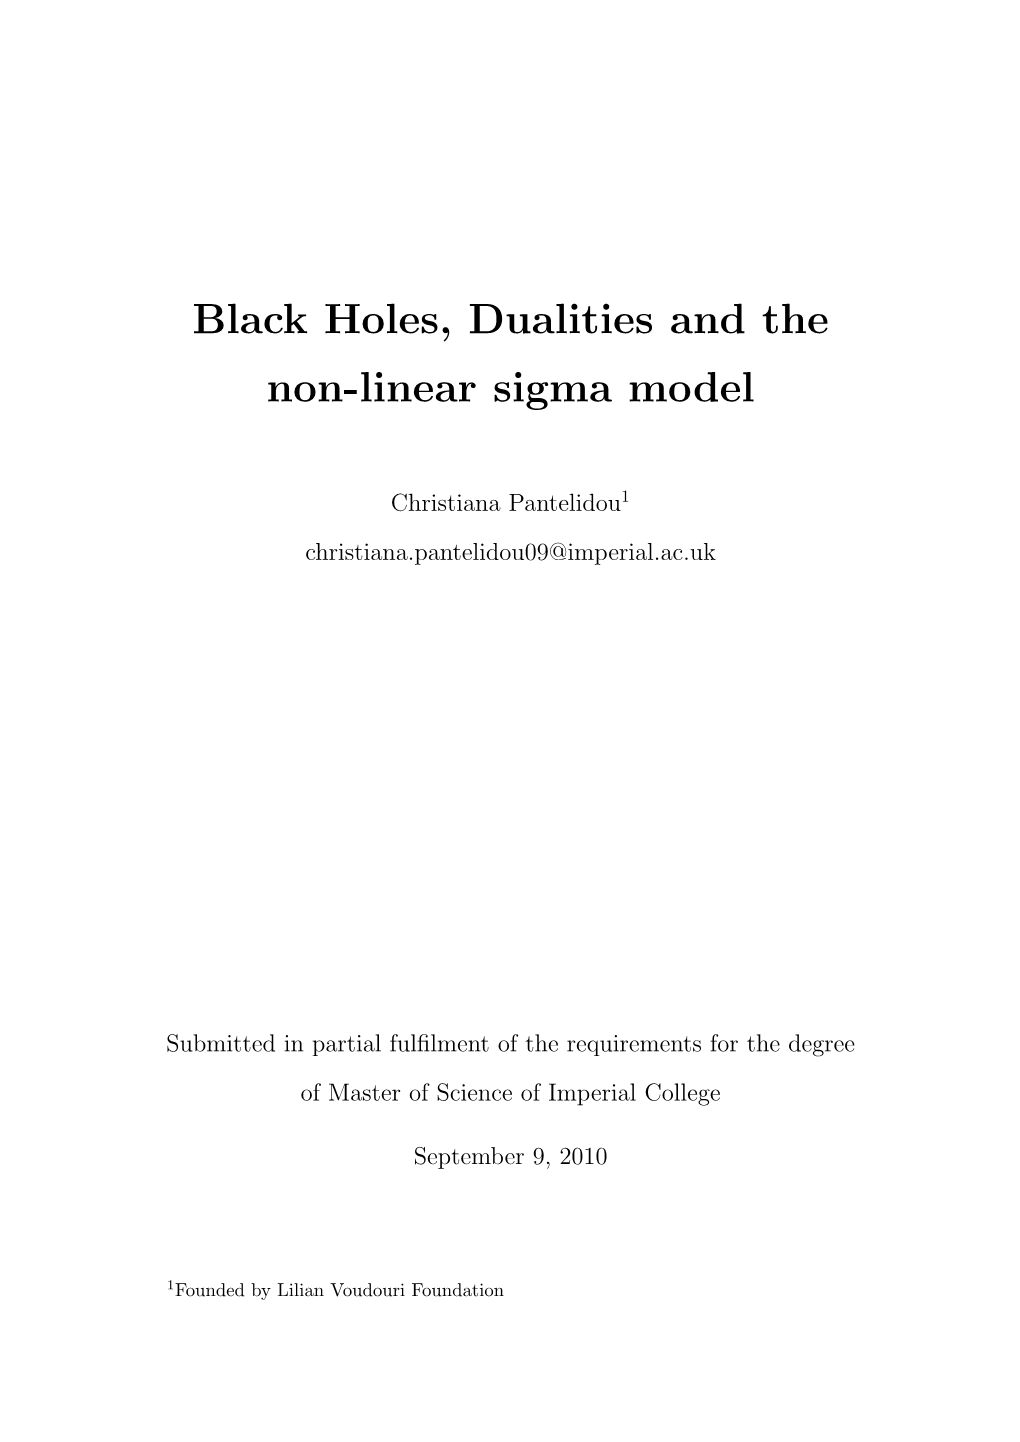 Black Holes, Dualities and the Non-Linear Sigma Model